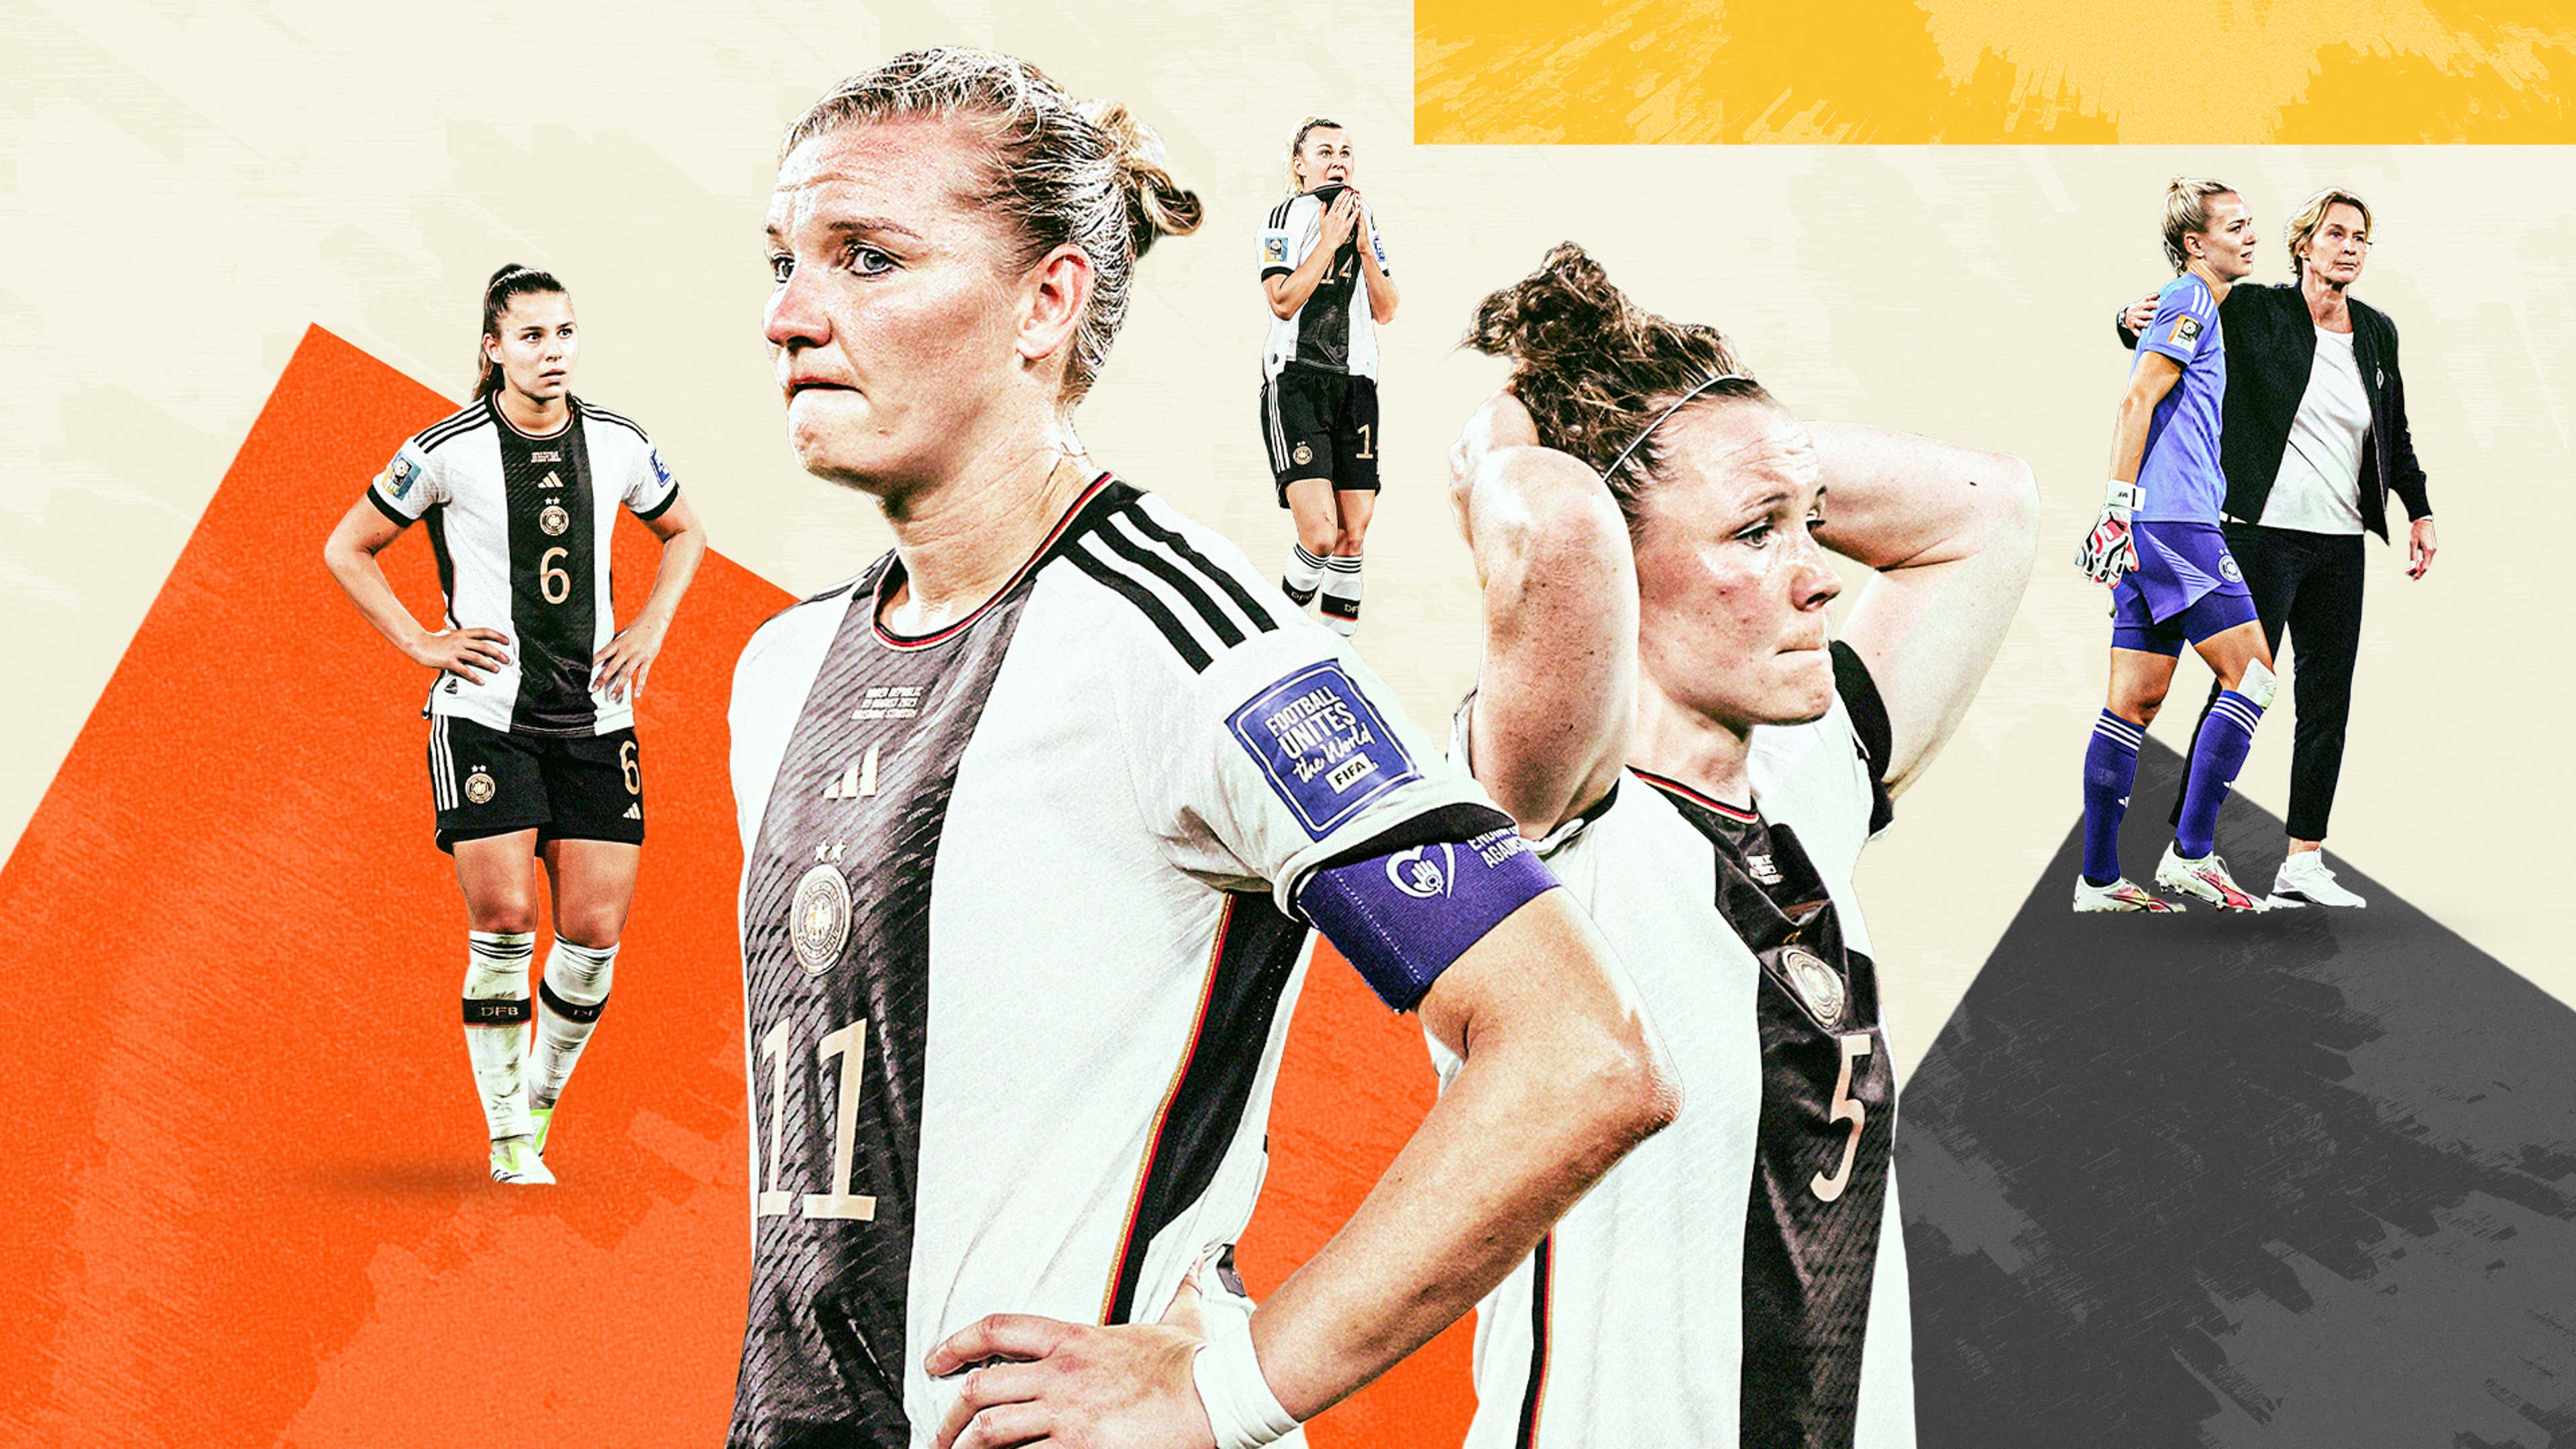 The happy exiles: why US women's soccer stars choose to play abroad, Women's football